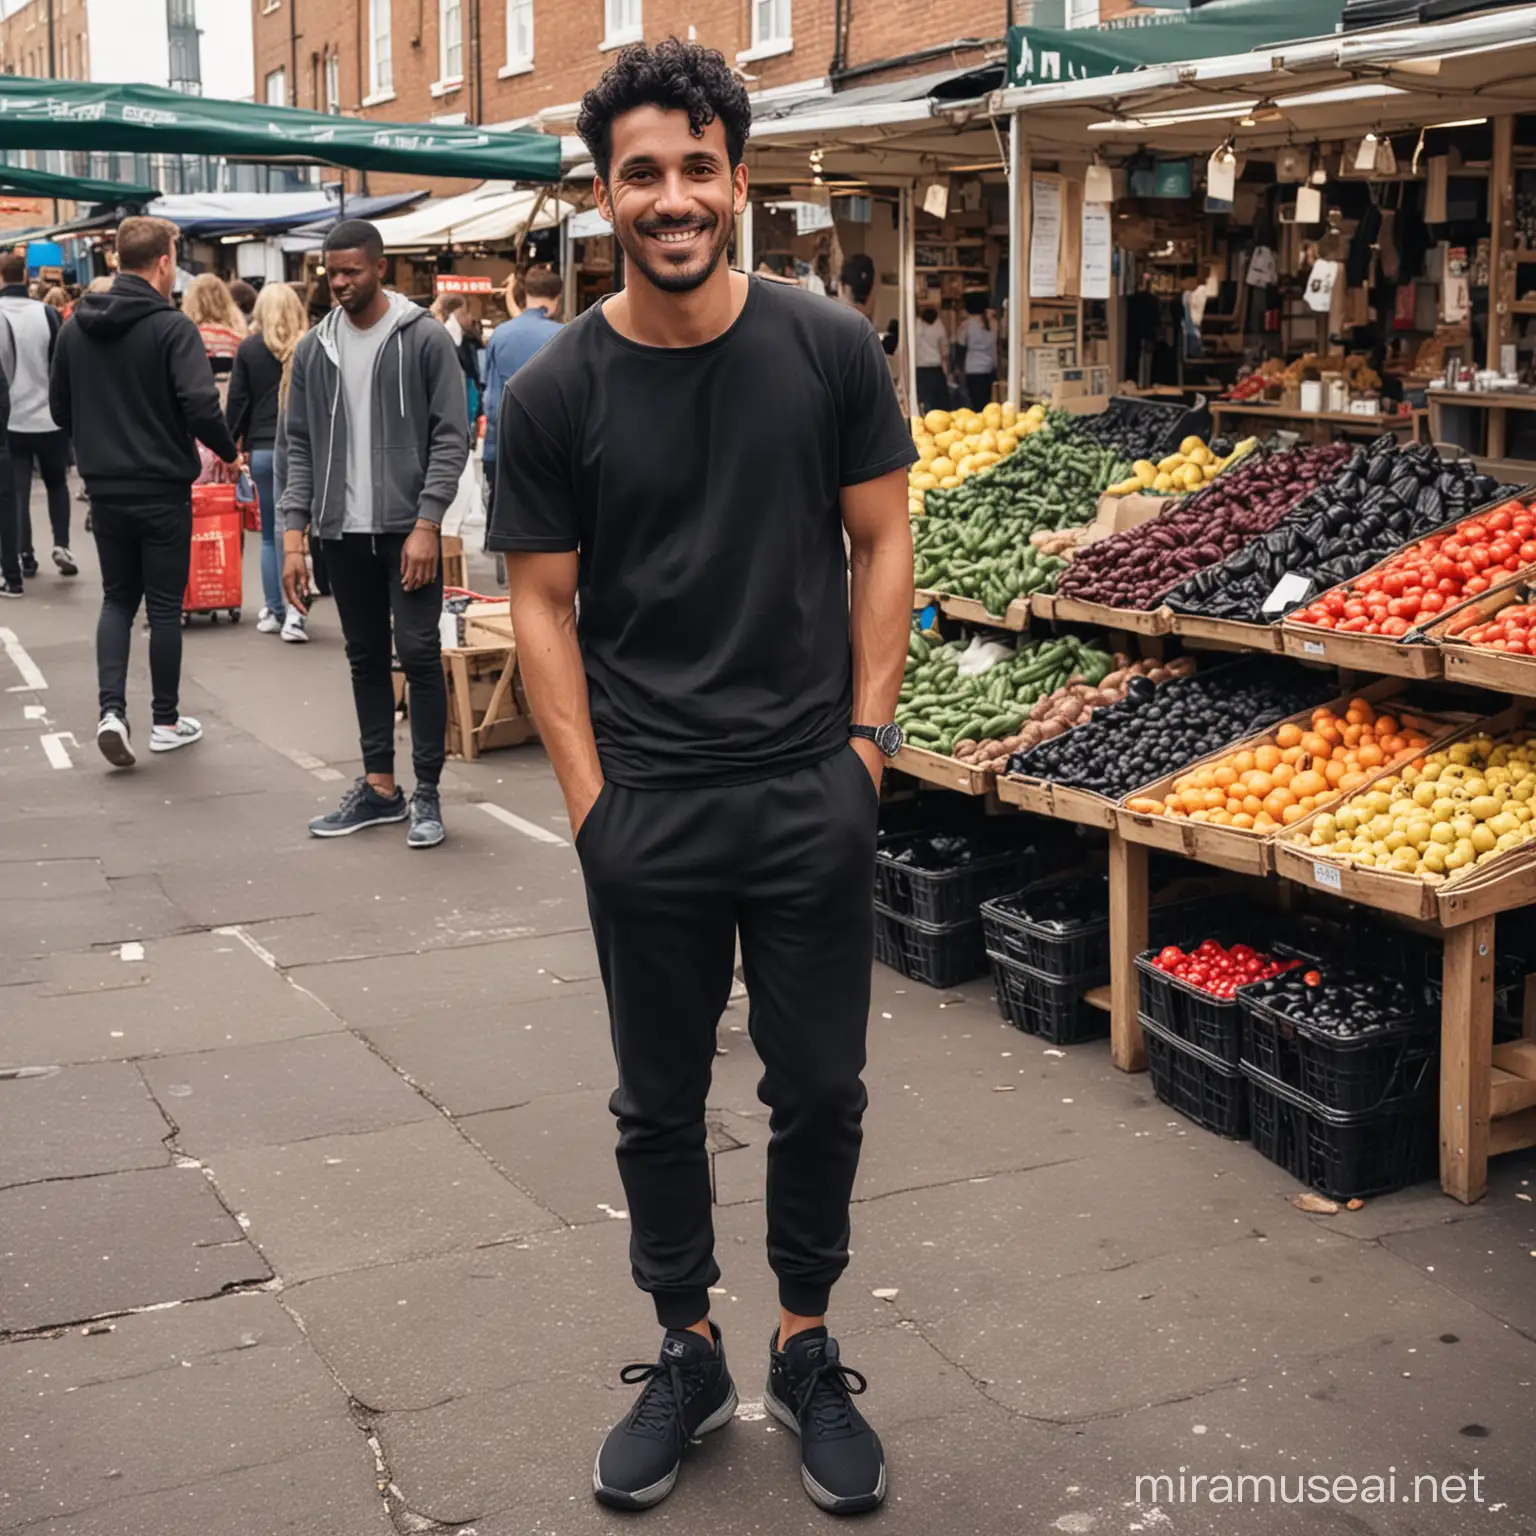 Smiling Male Market Trader with Black Hair and Trainers